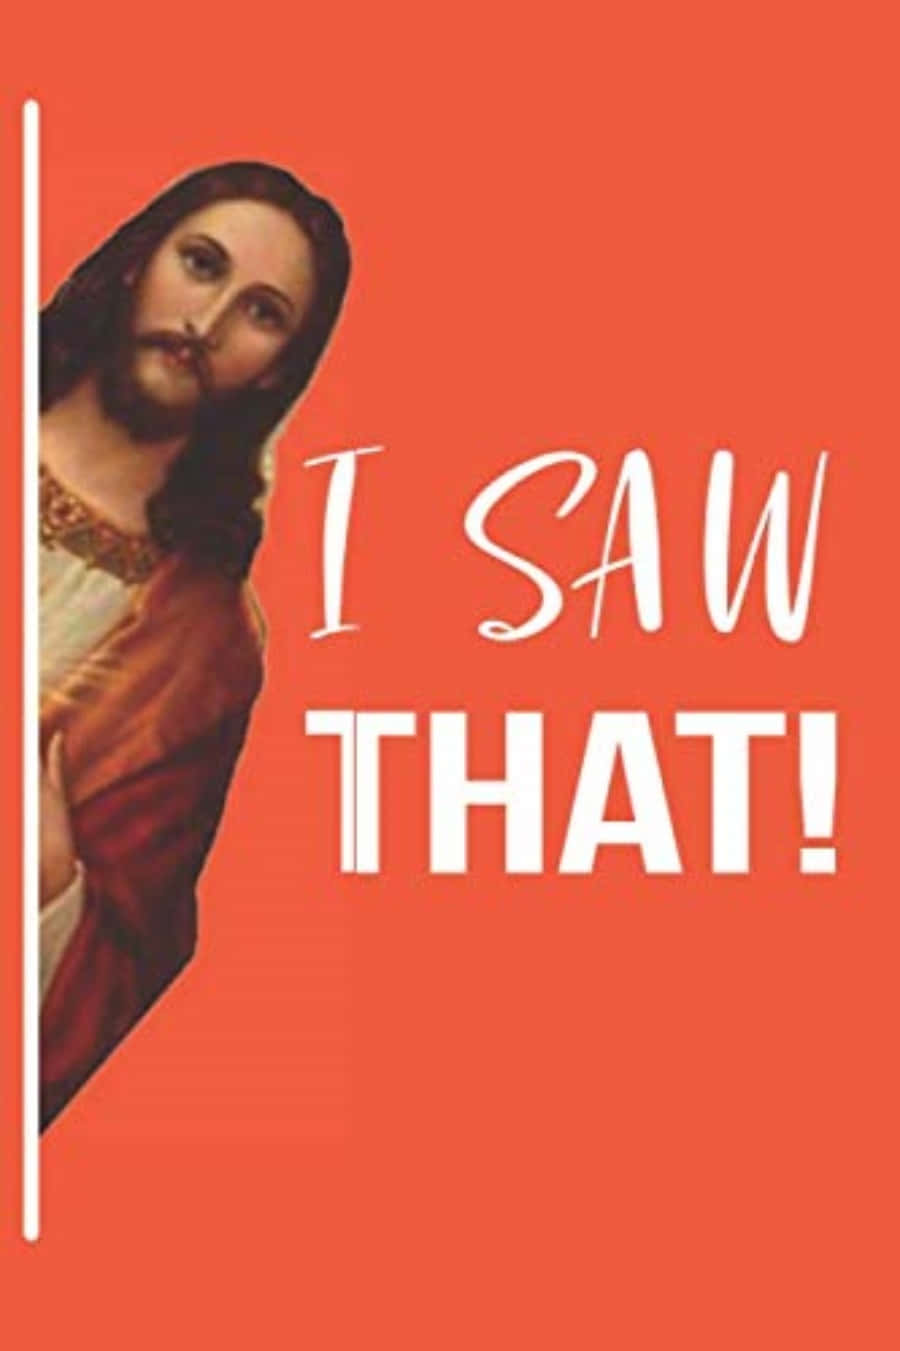 Download Funny Jesus Pictures 900 x 1351 